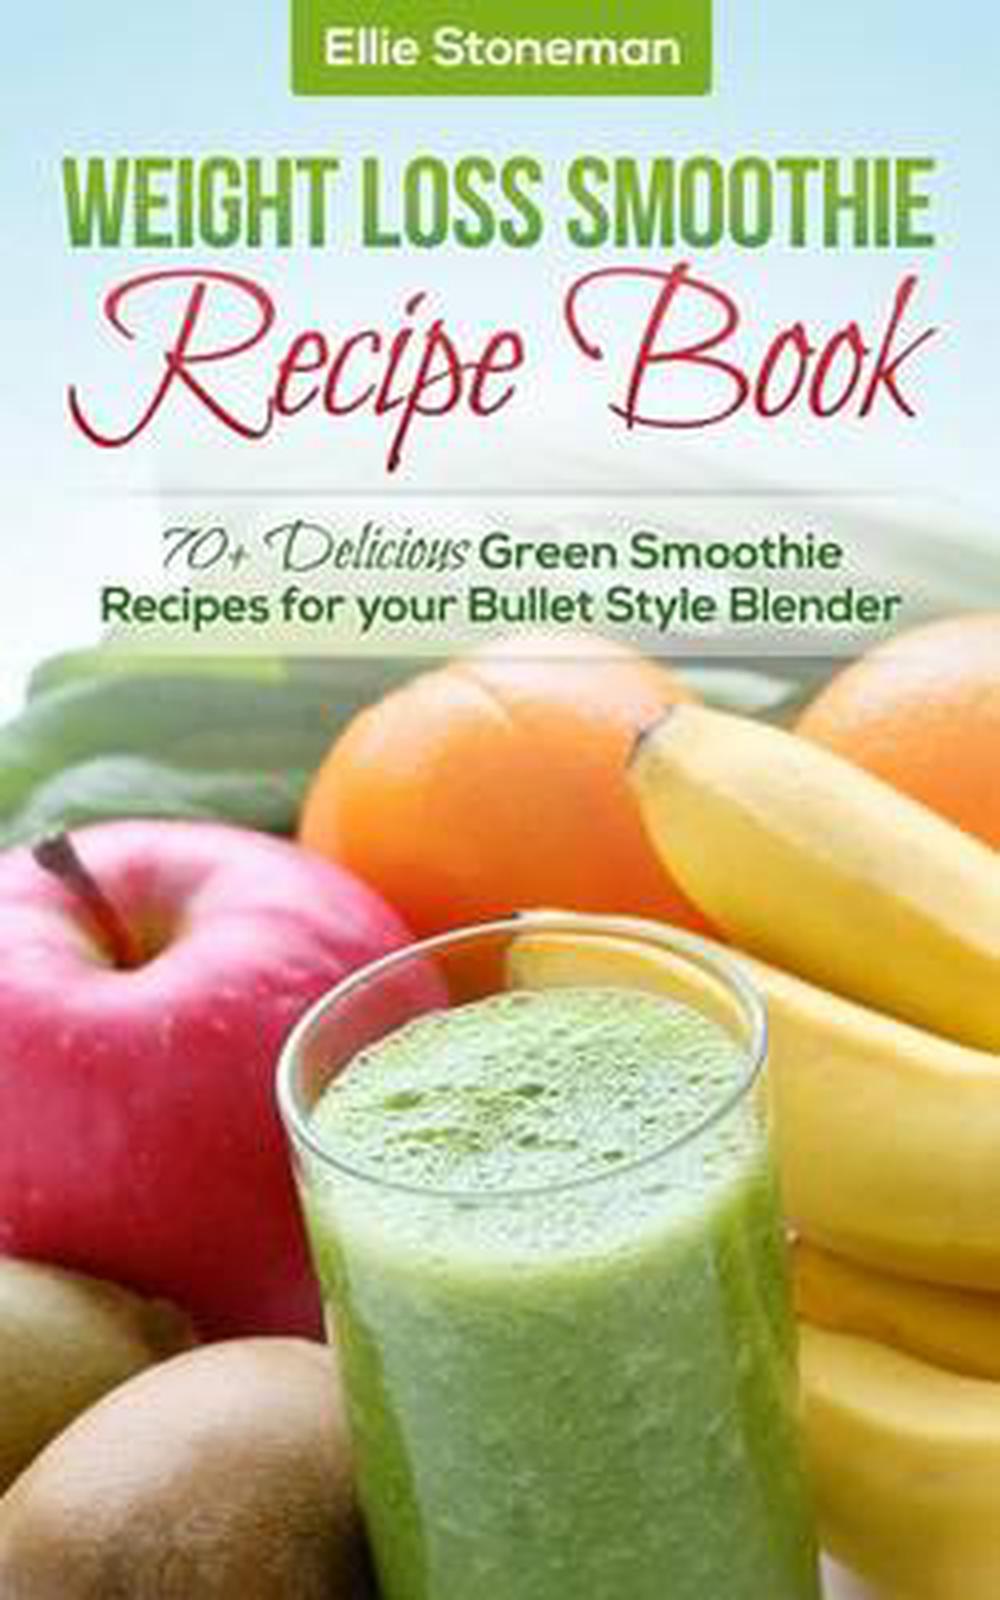 Weight Loss Smoothie Recipe Book: 70+ Delicious Green Smoothie Recipes ...